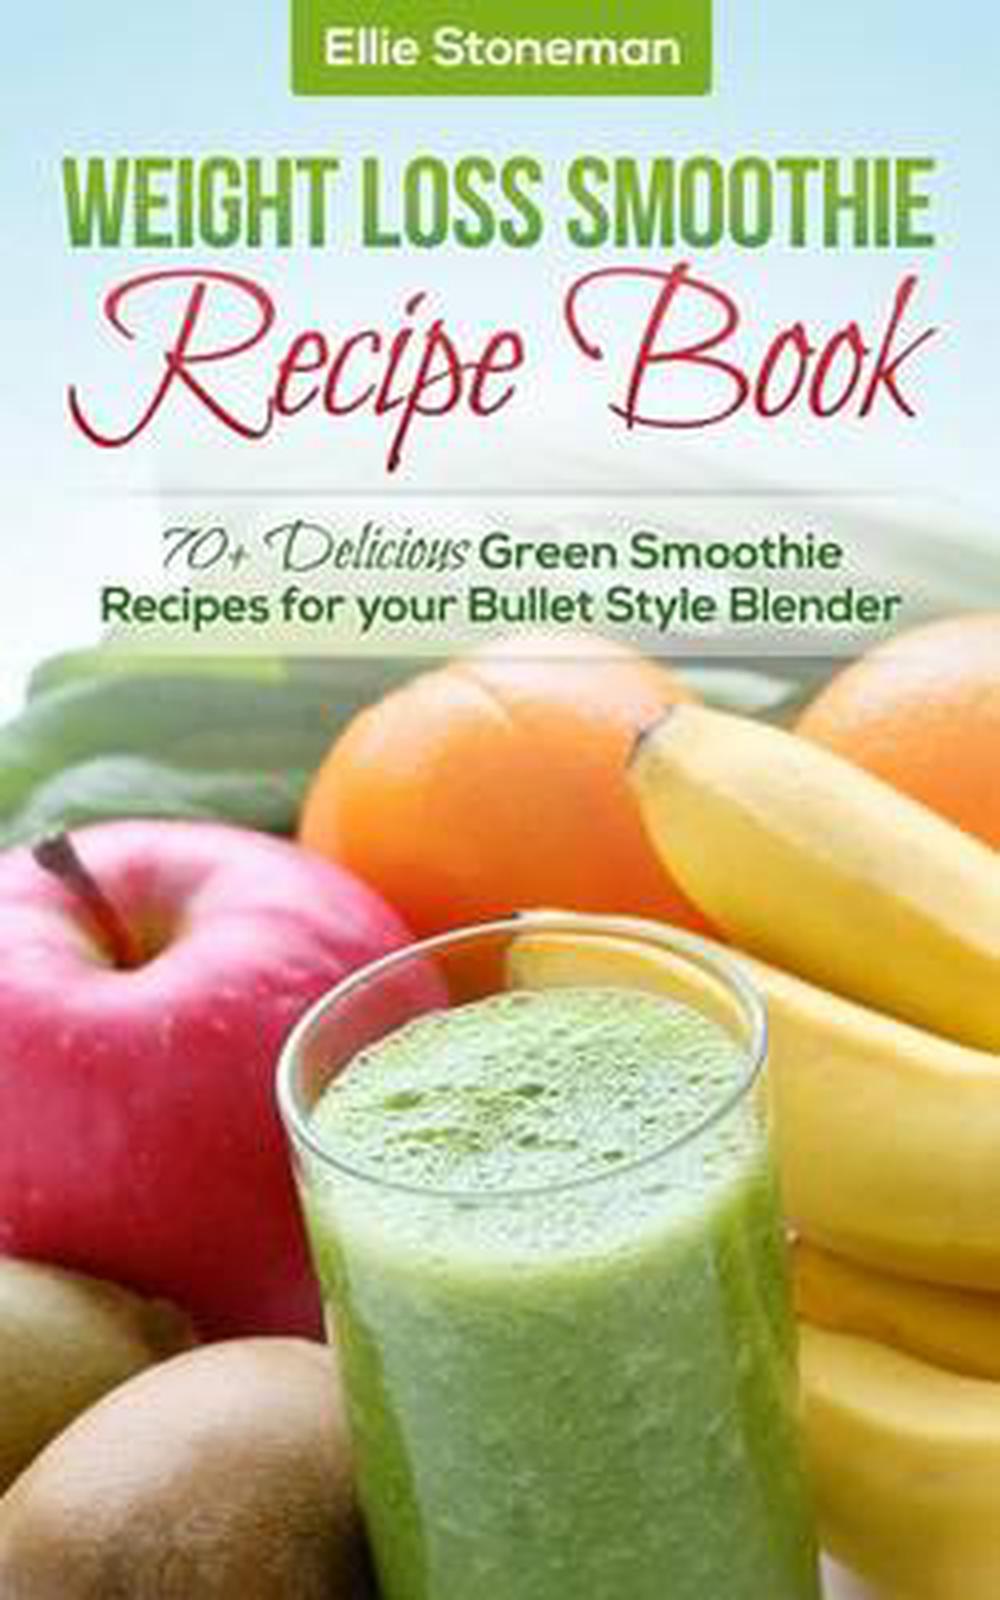 Weight Loss Smoothie Recipe Book: 70+ Delicious Green Smoothie Recipes ...